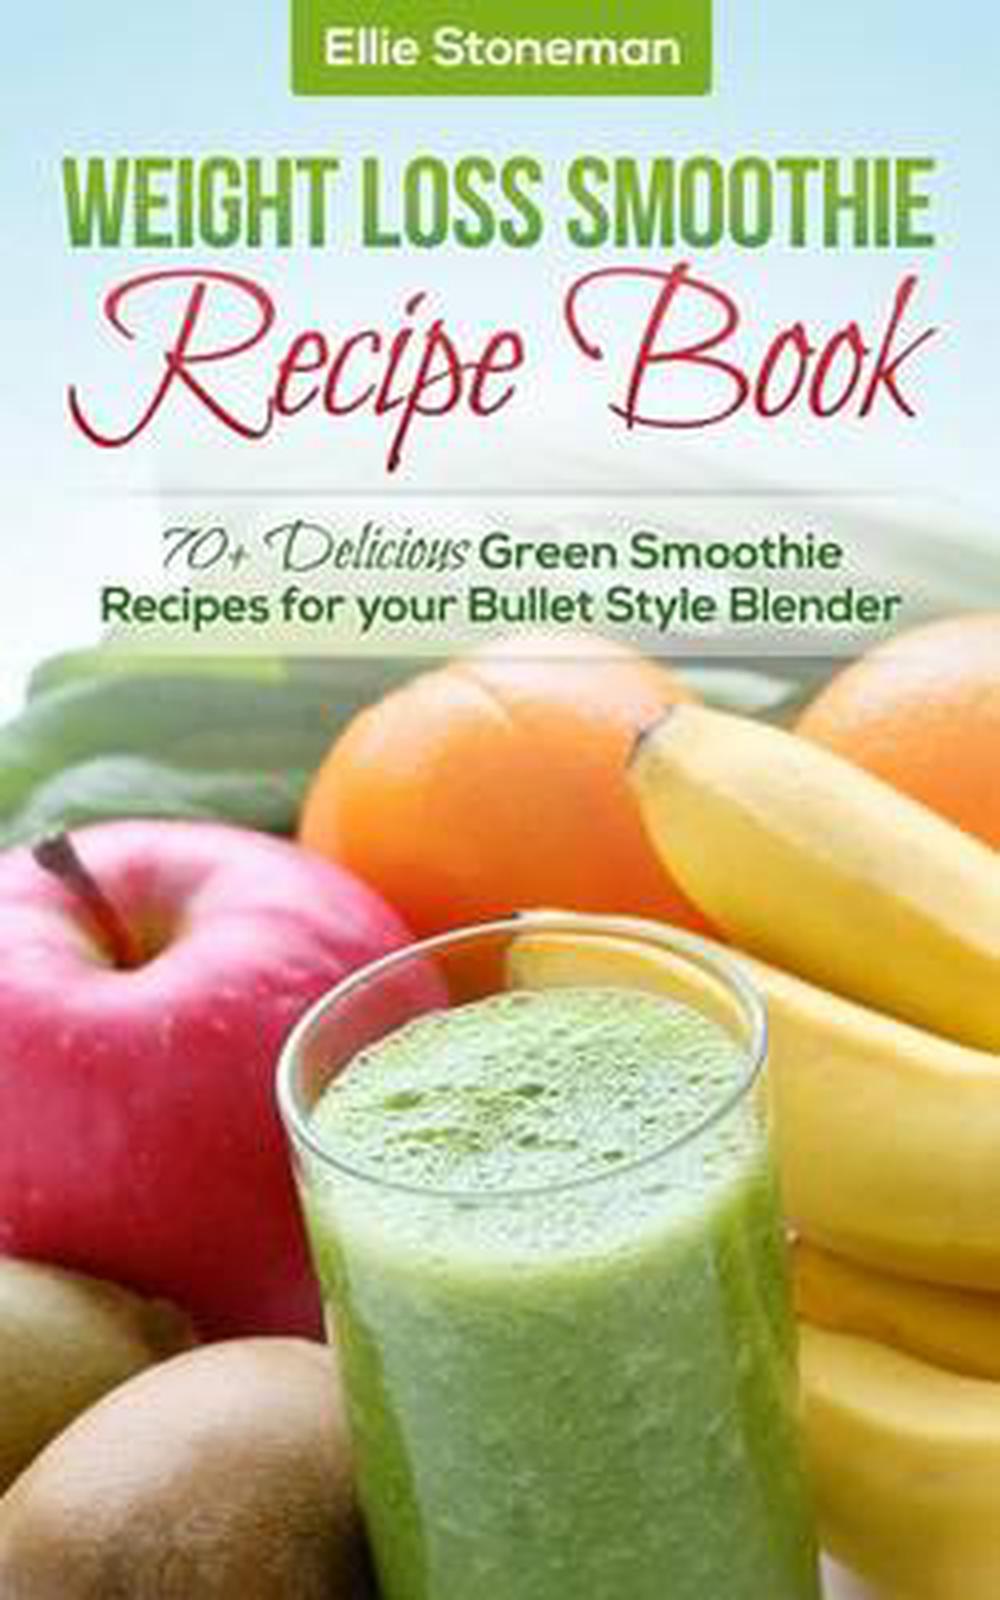 Weight Loss Smoothie Recipe Book: 70+ Delicious Green Smoothie Recipes ...